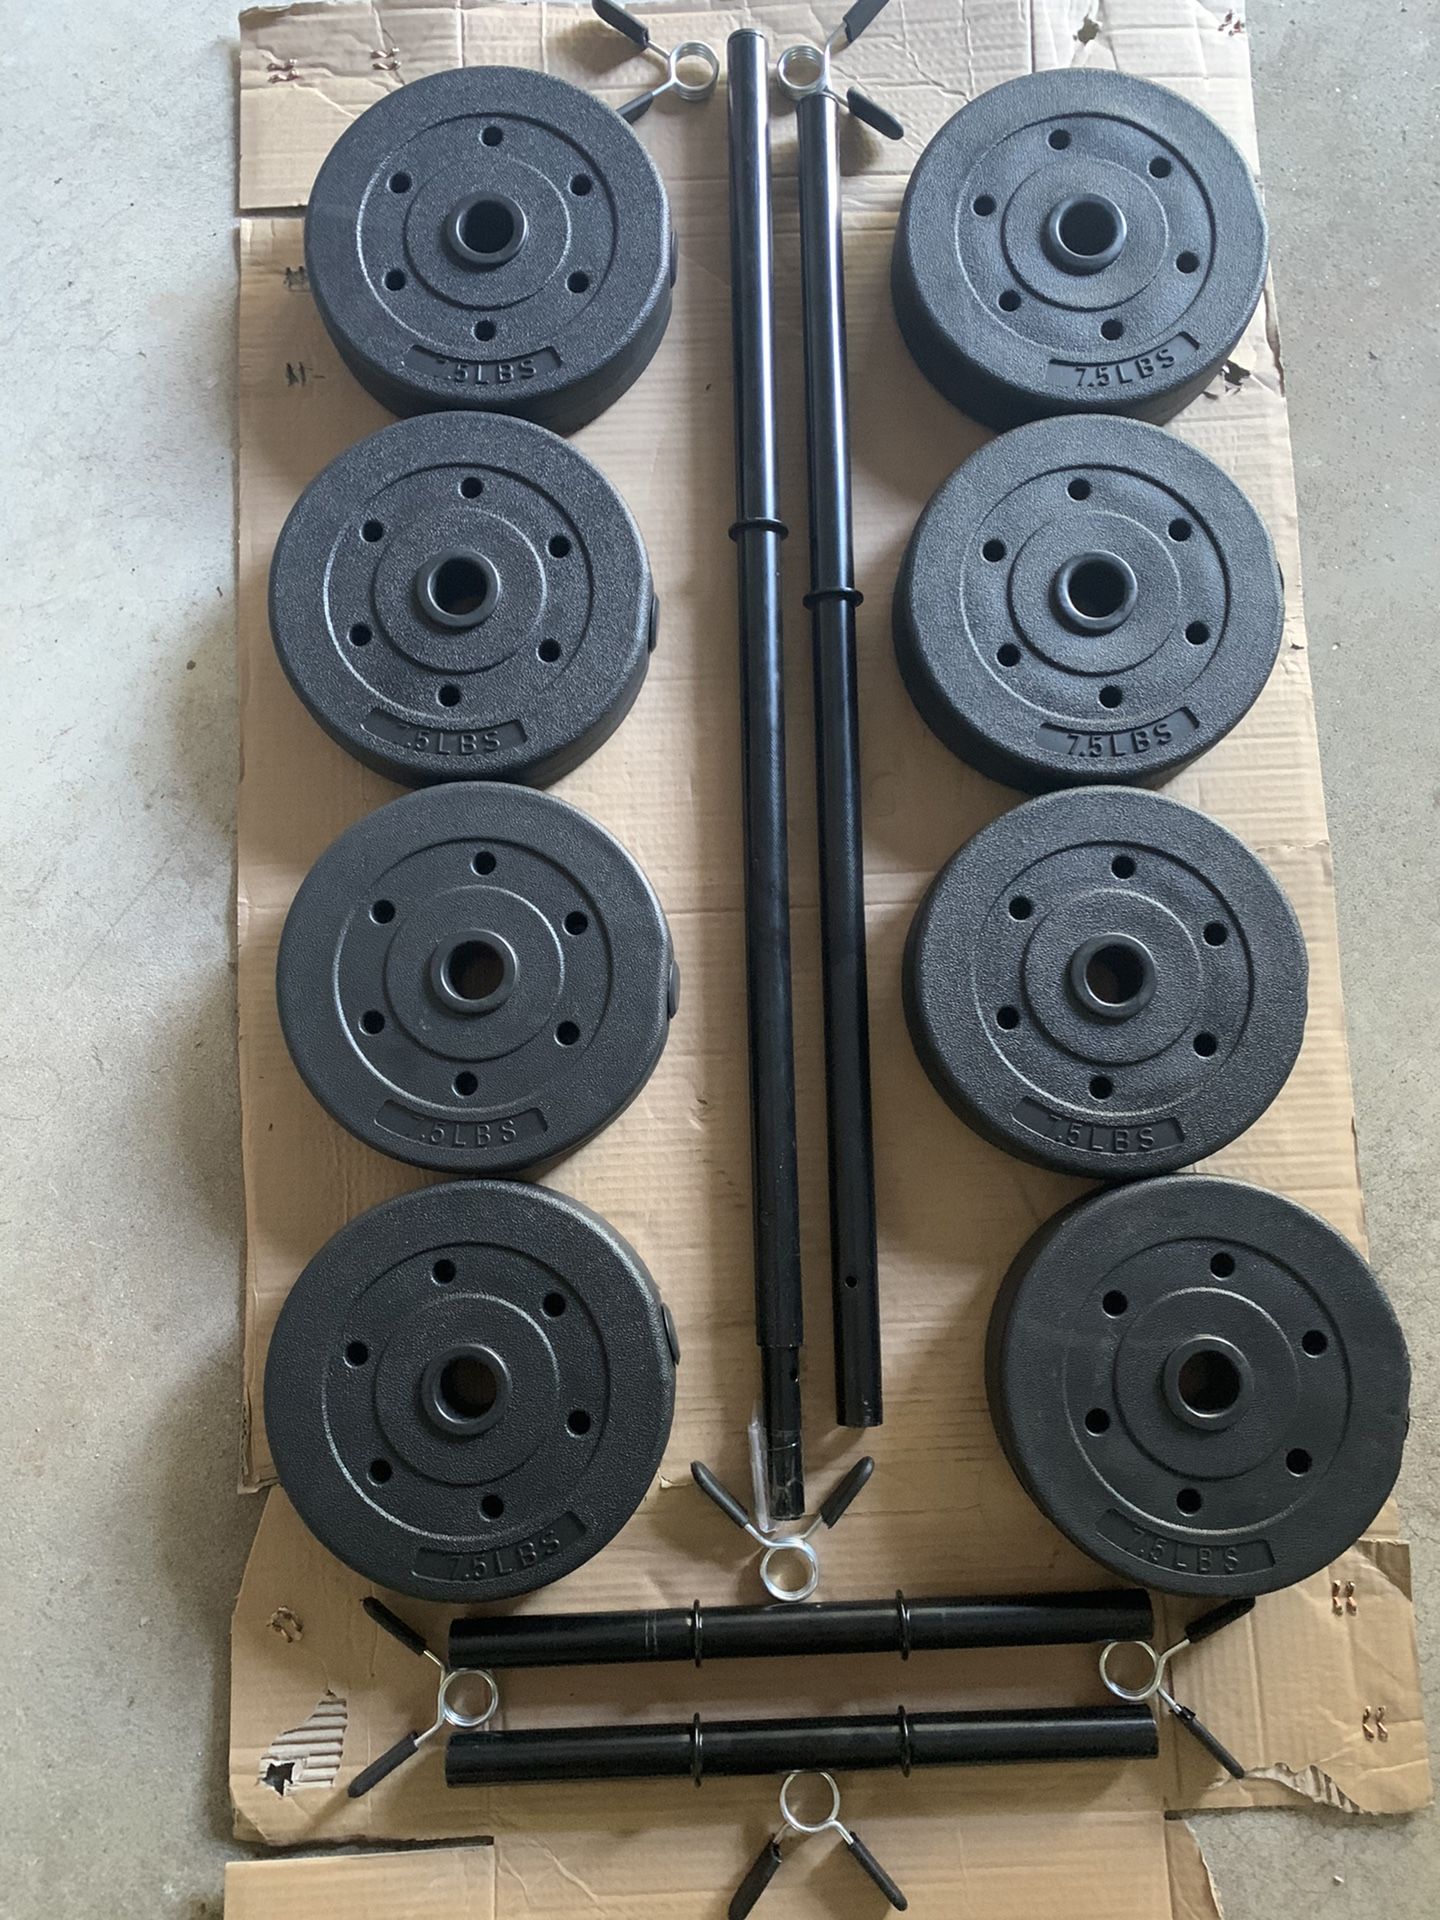 Cap Adjustable Alternating Barbell (Up to 70lbs total) and Dumbbell (Up to 30lbs each) Set 1” Plates